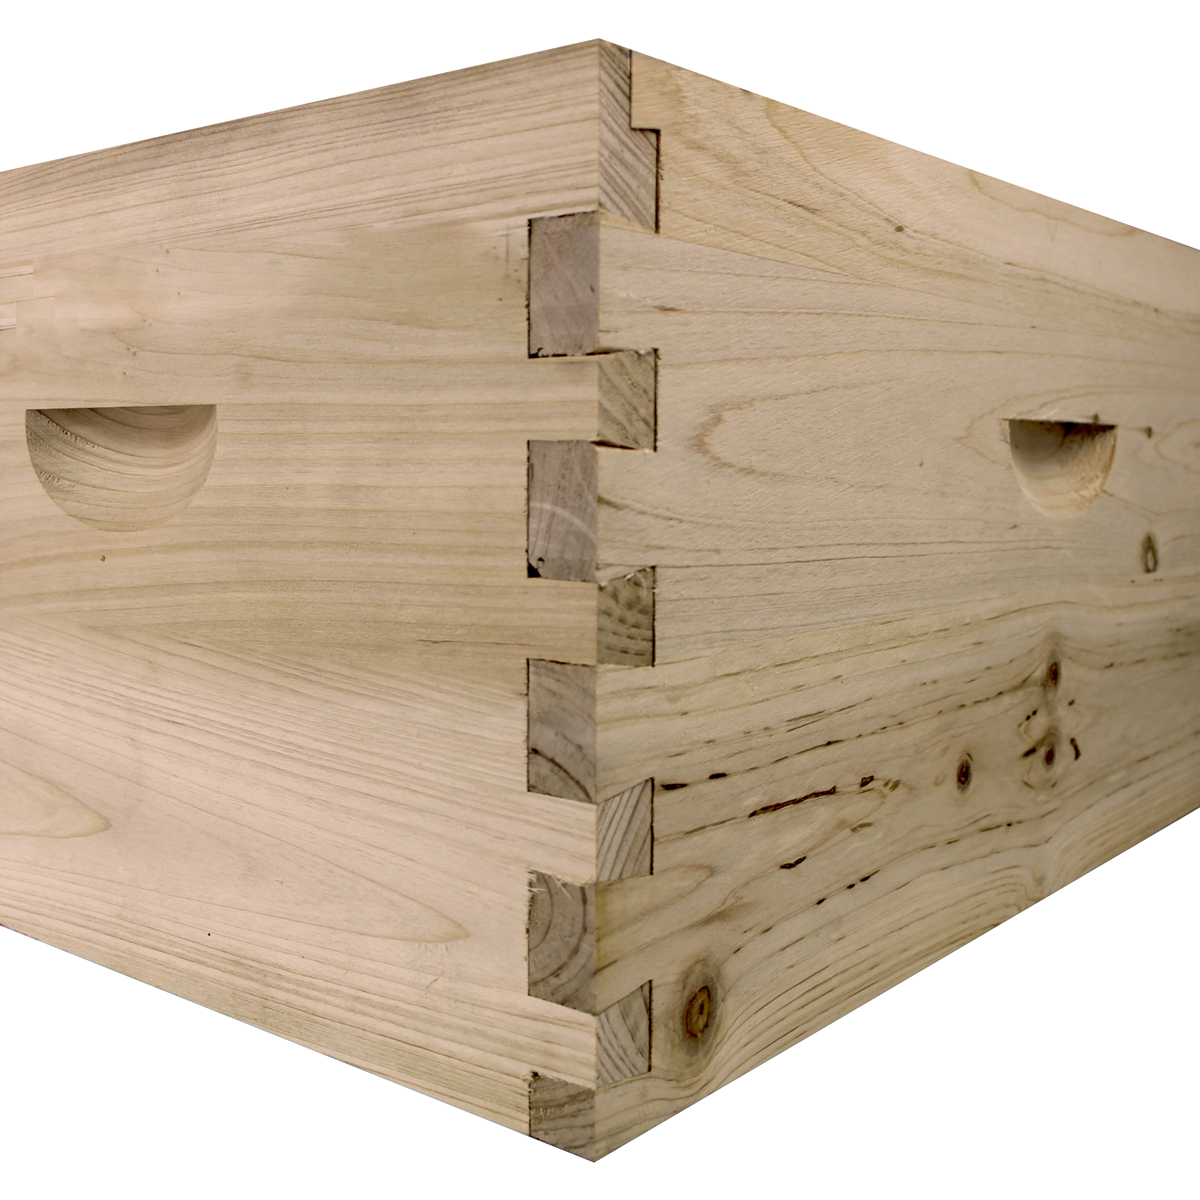 NuBee 8 Frame Deep Bee Box Uses Dovetail Joints